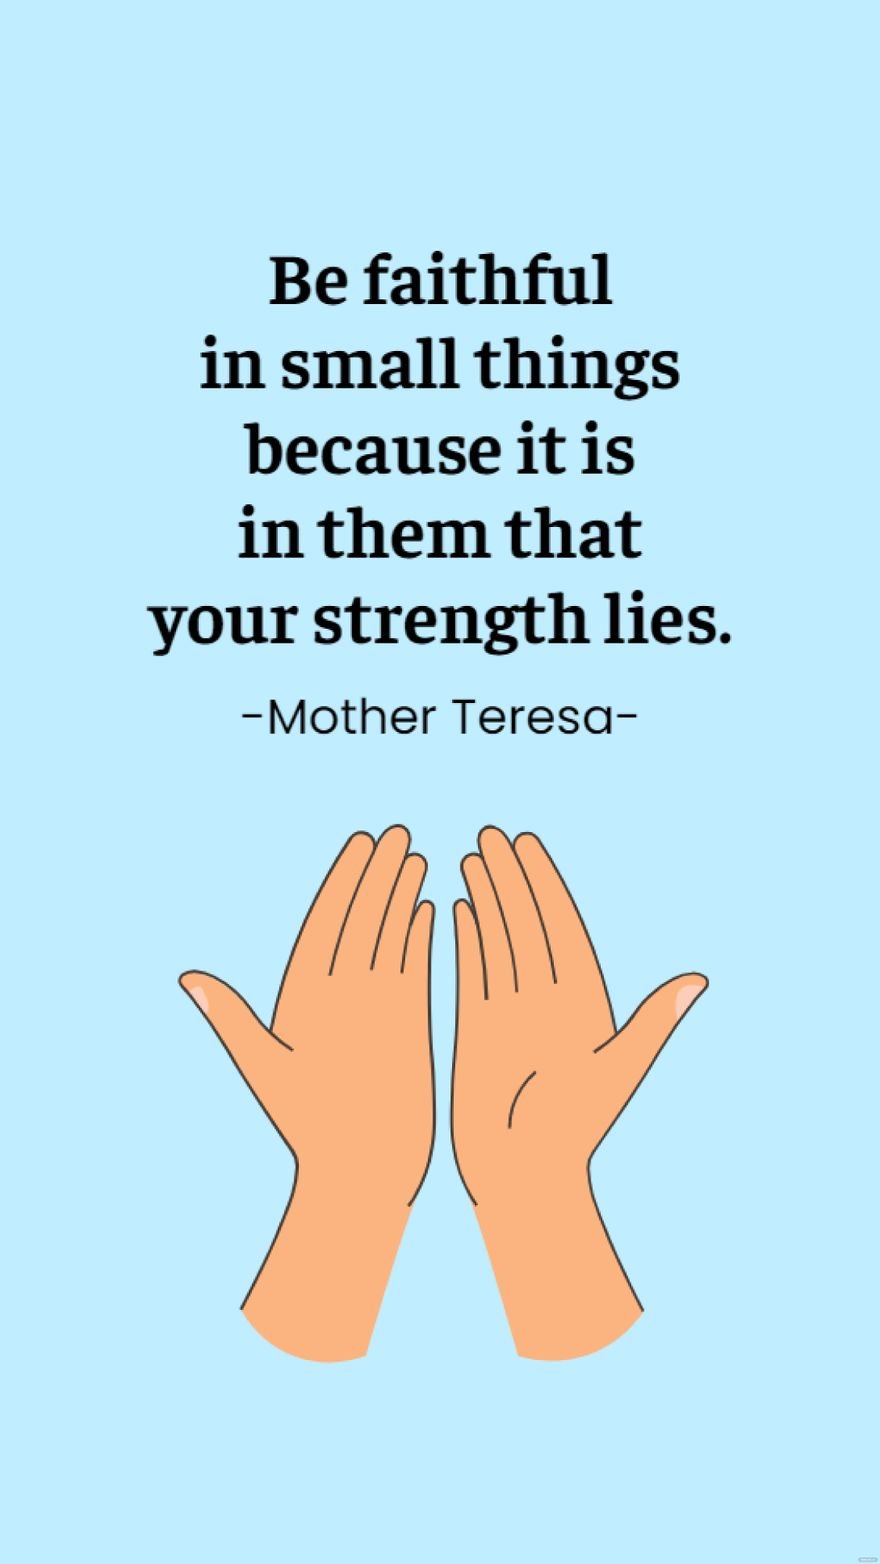 Mother Teresa - Be faithful in small things because it is in them that your strength lies. in JPG